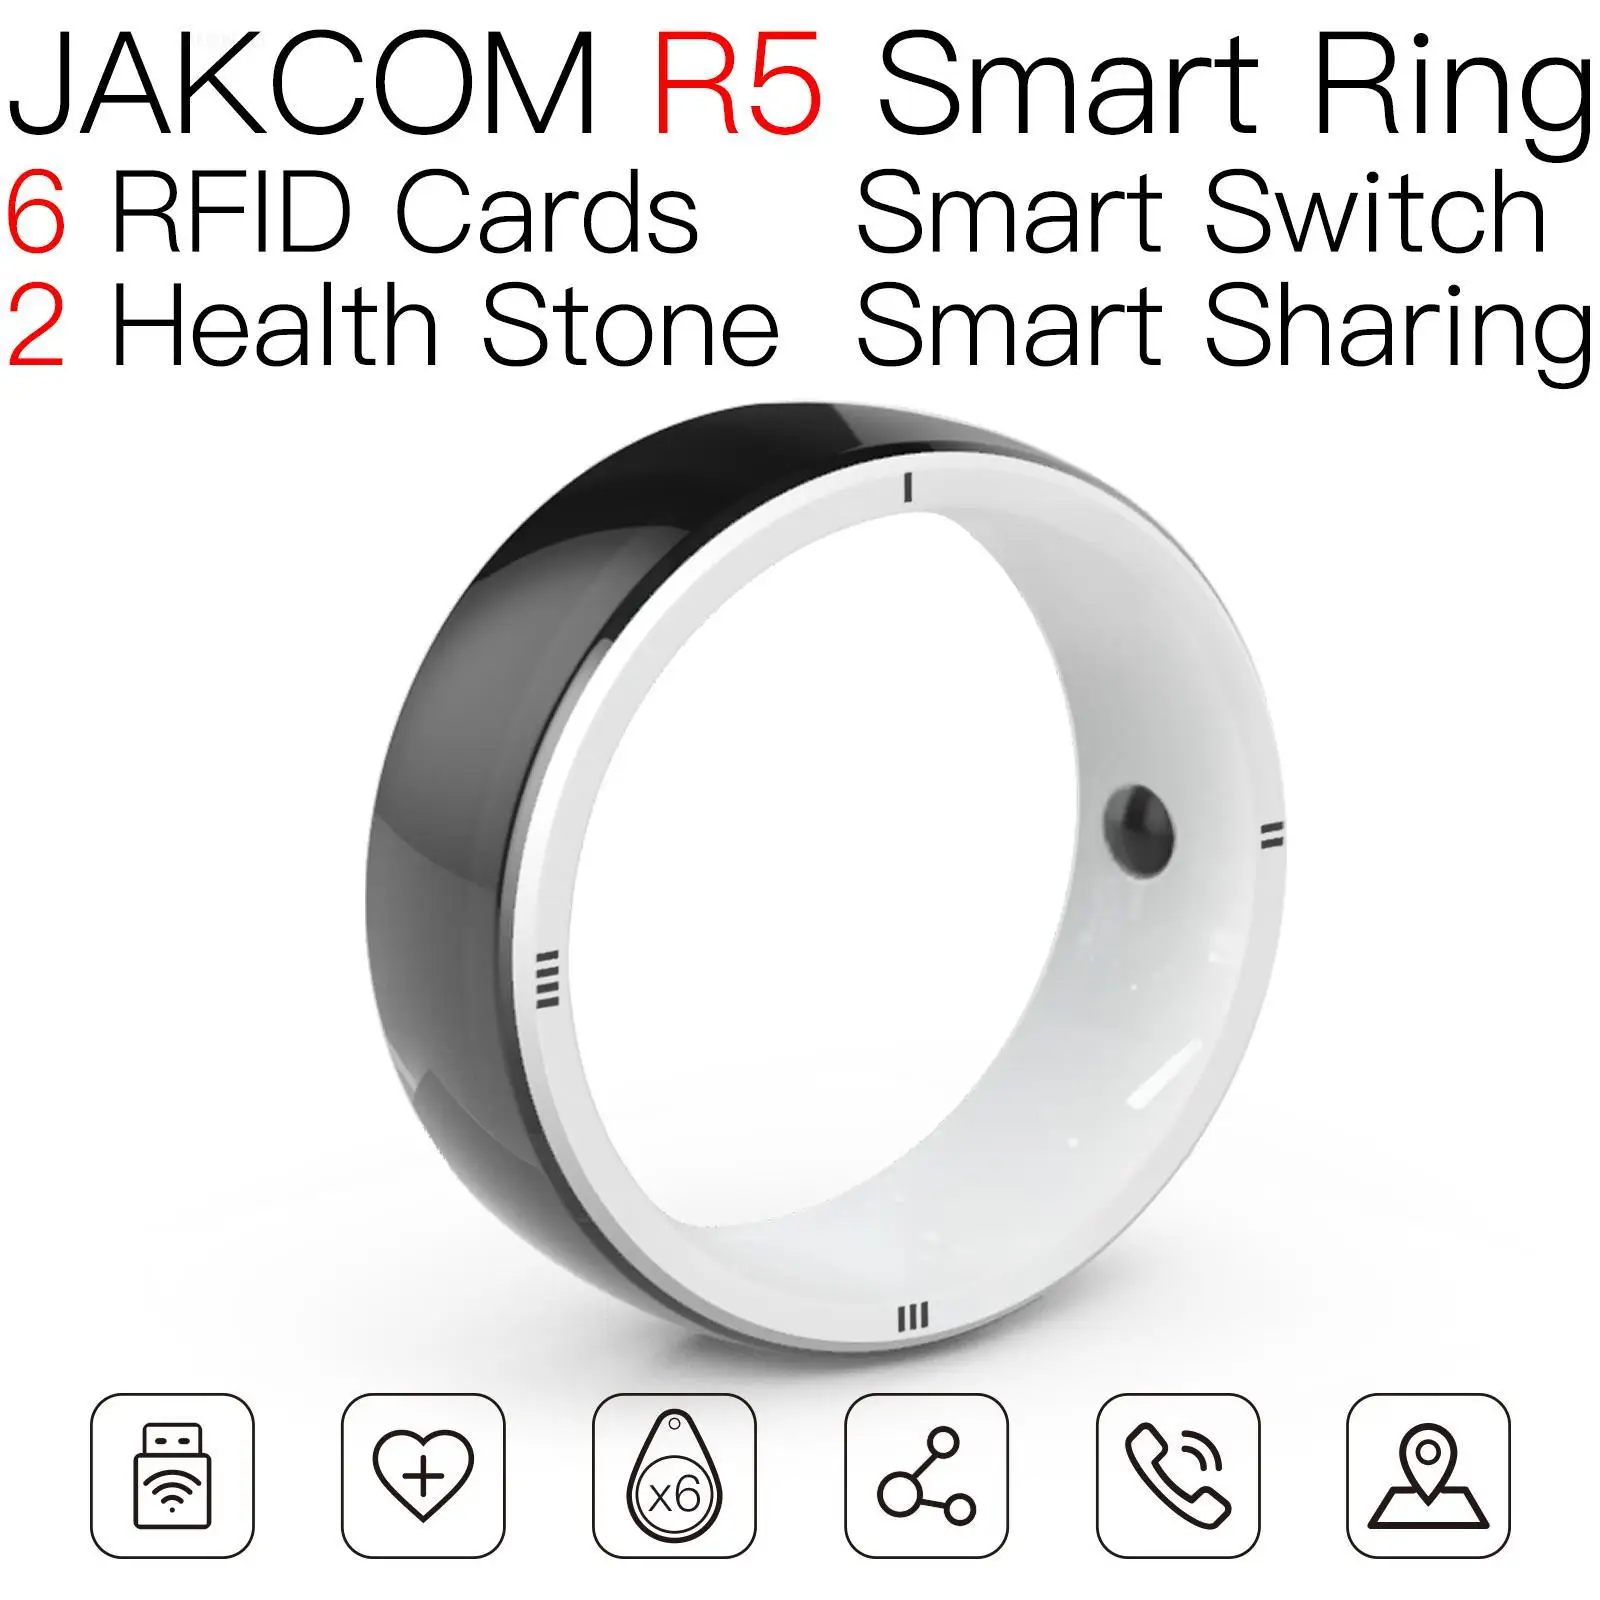 

JAKCOM R5 Smart Ring Nice than ring pay hf uhf nfc classic 1k s50 and h3 uid led tag chip telcel emp generator coin 125 khz